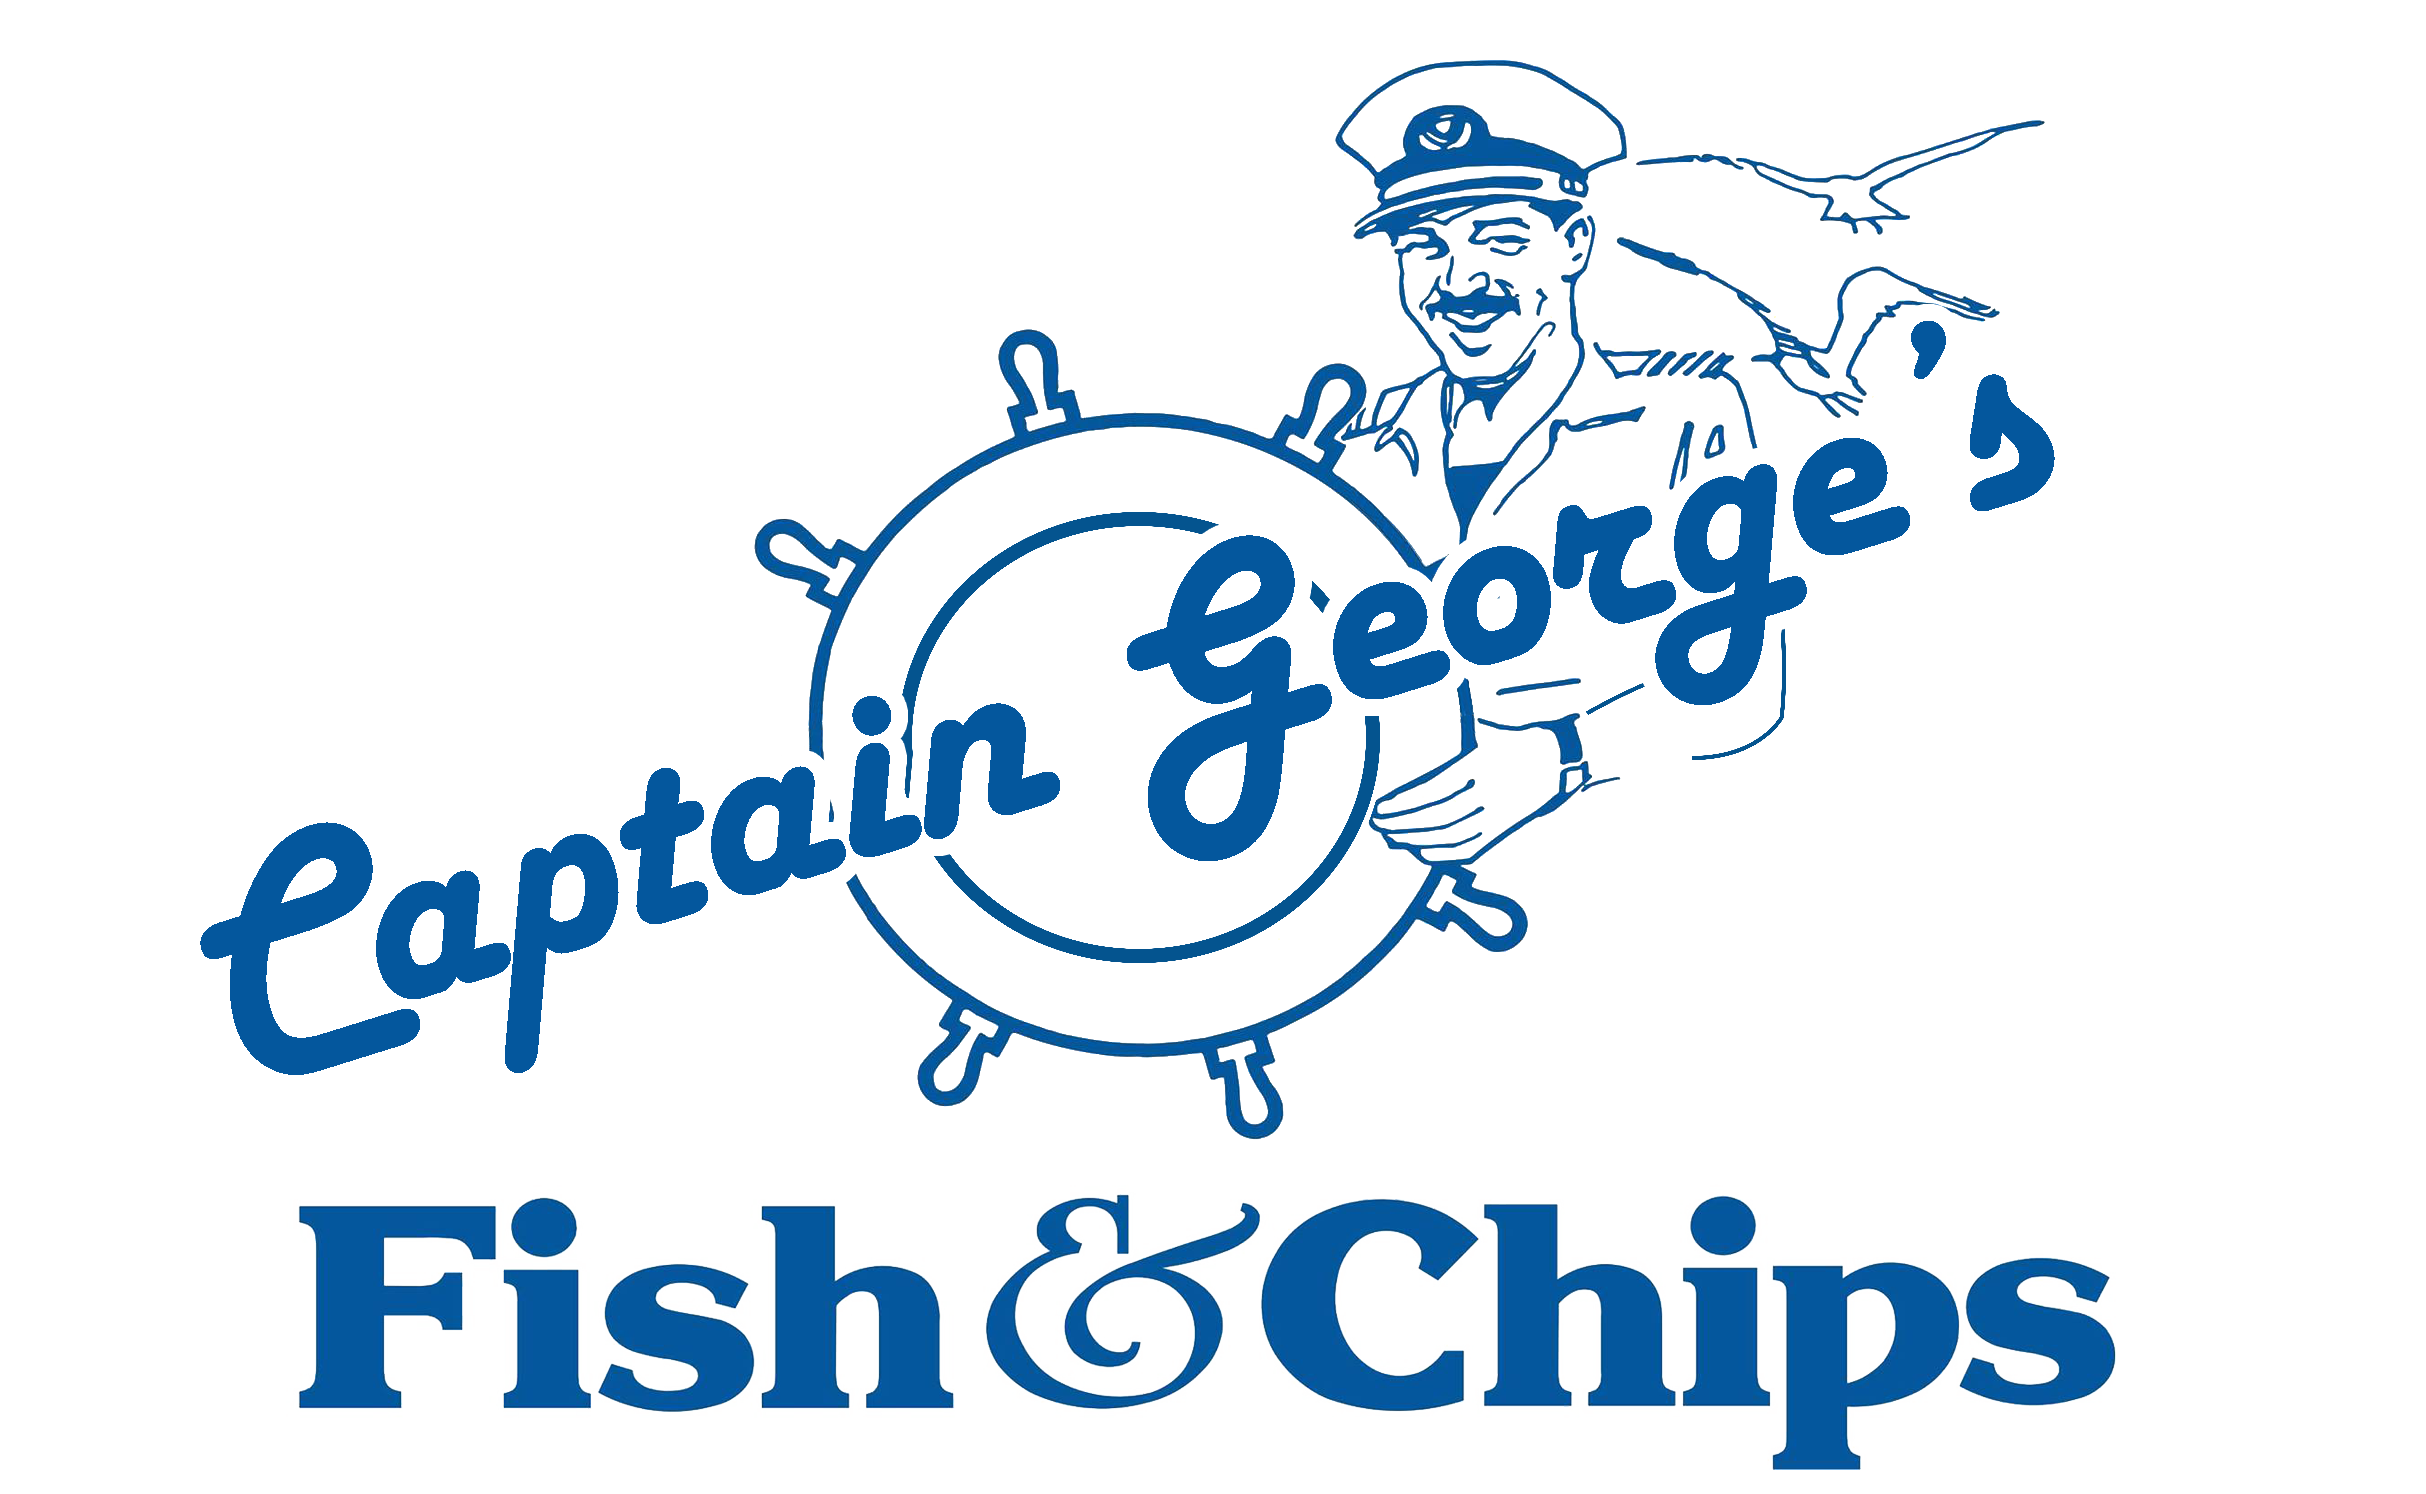 Captain George Fish and Chips